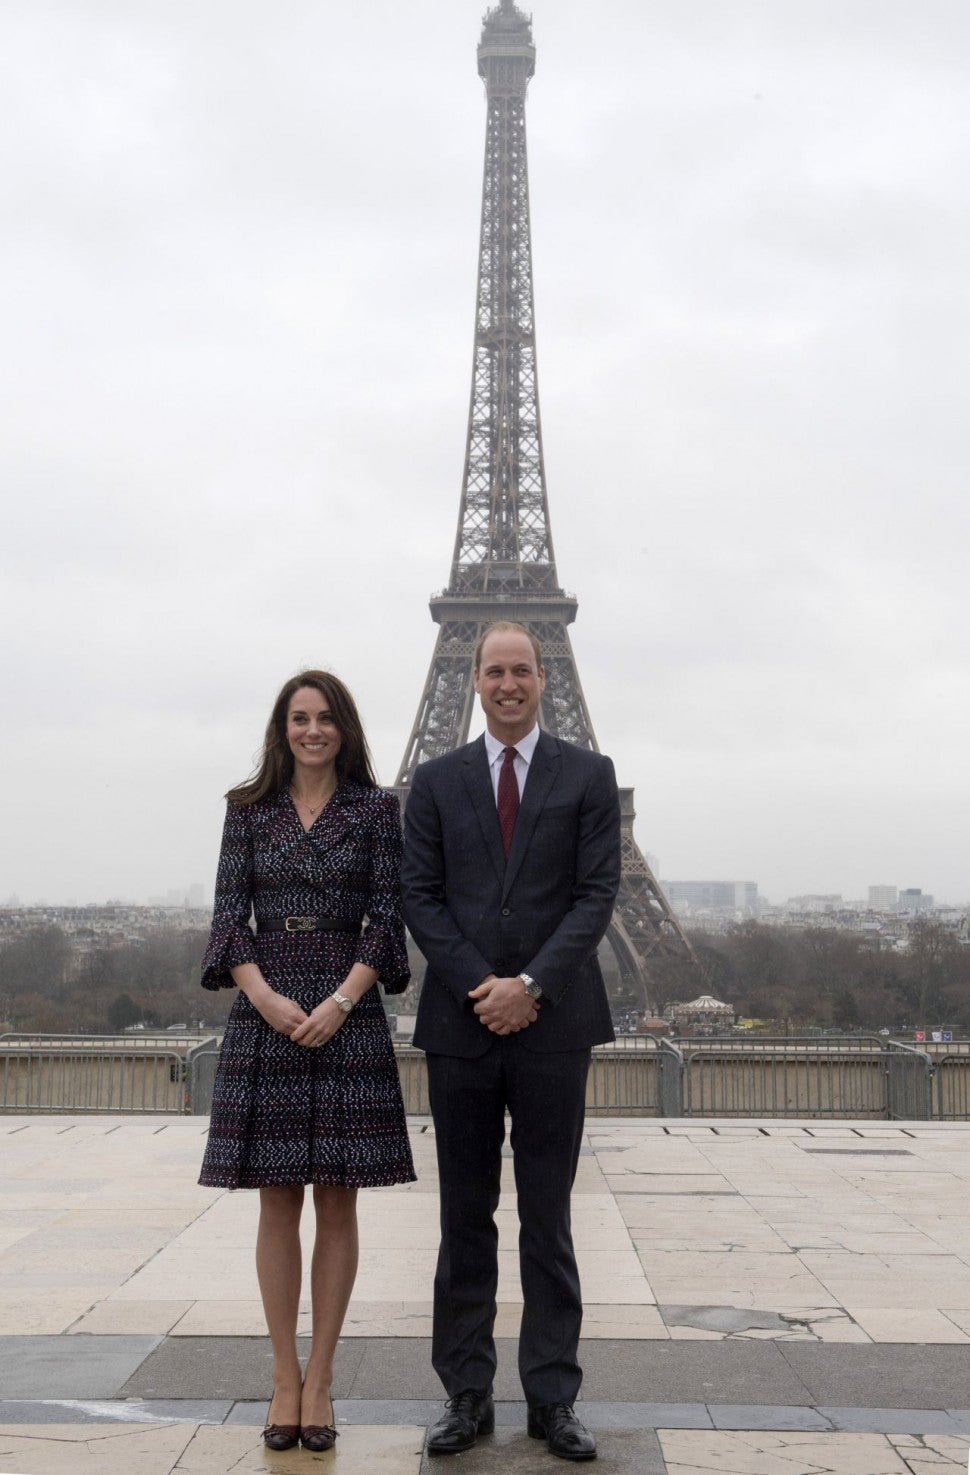 Kate Middleton and Prince William Pose for Pics in Front of Eiffel Tower,  Look More in Love Than Ever! | Entertainment Tonight